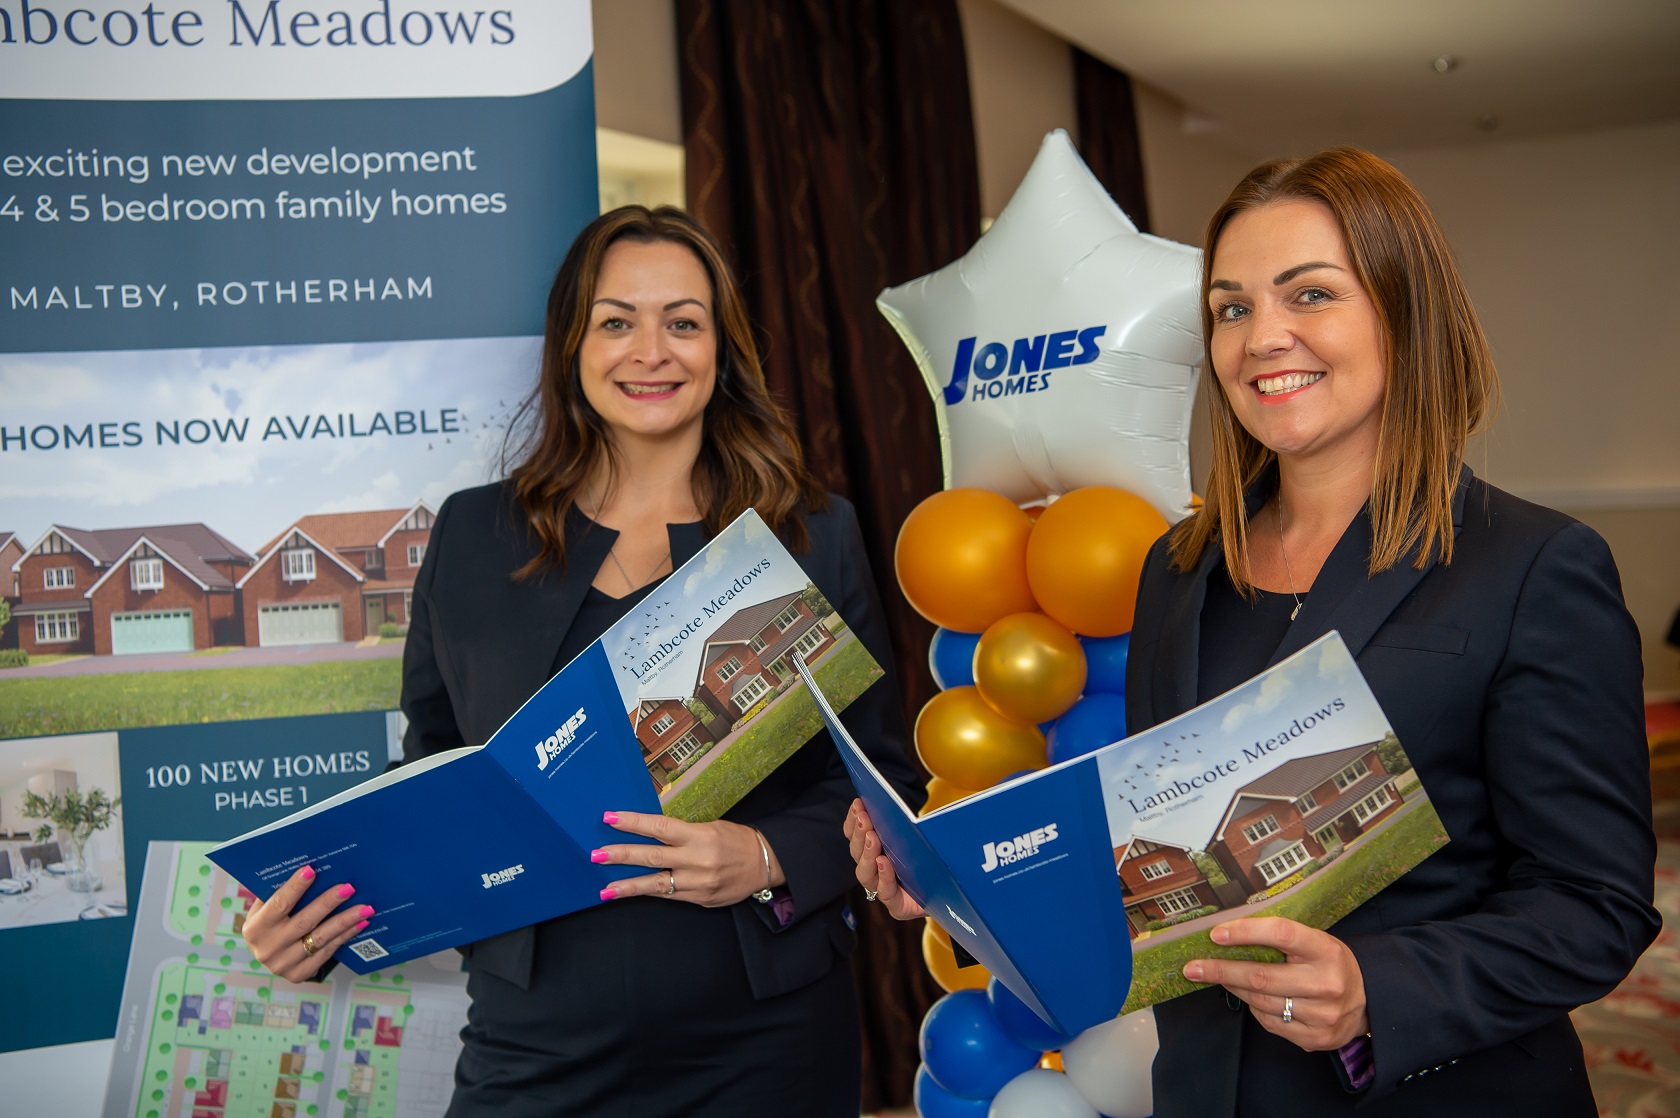 Jones Homes launches new 100-home development in Maltby